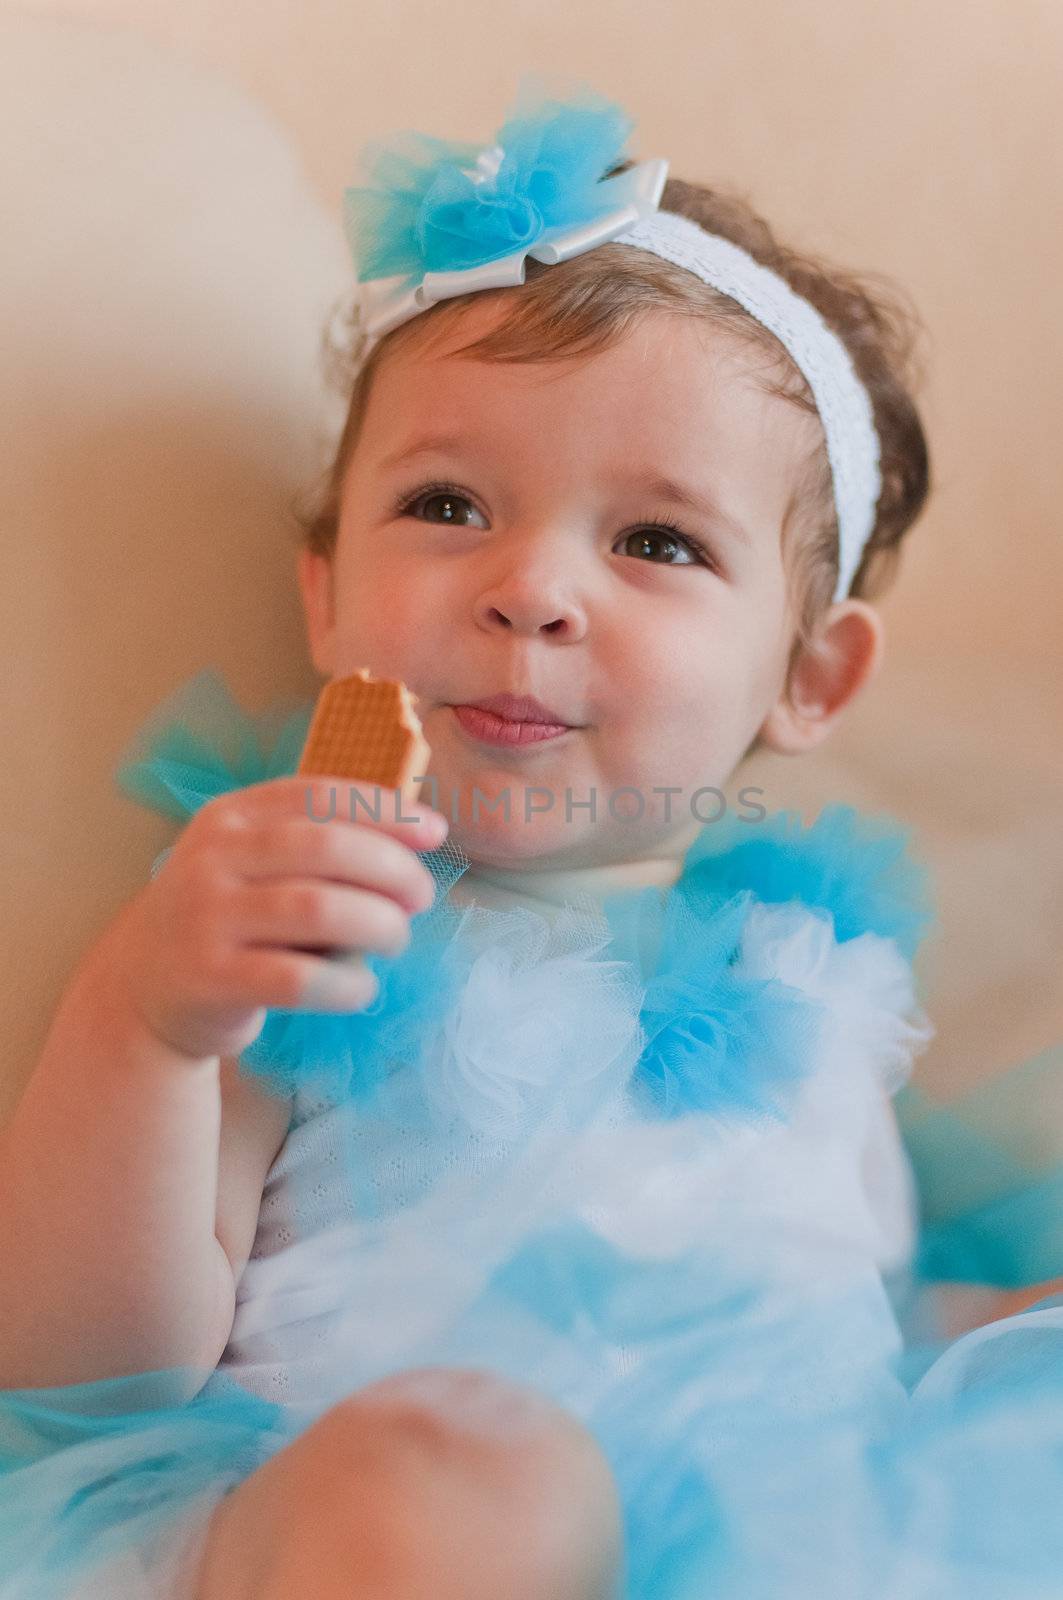 Little girl in the blue dress eats cookie by Linaga